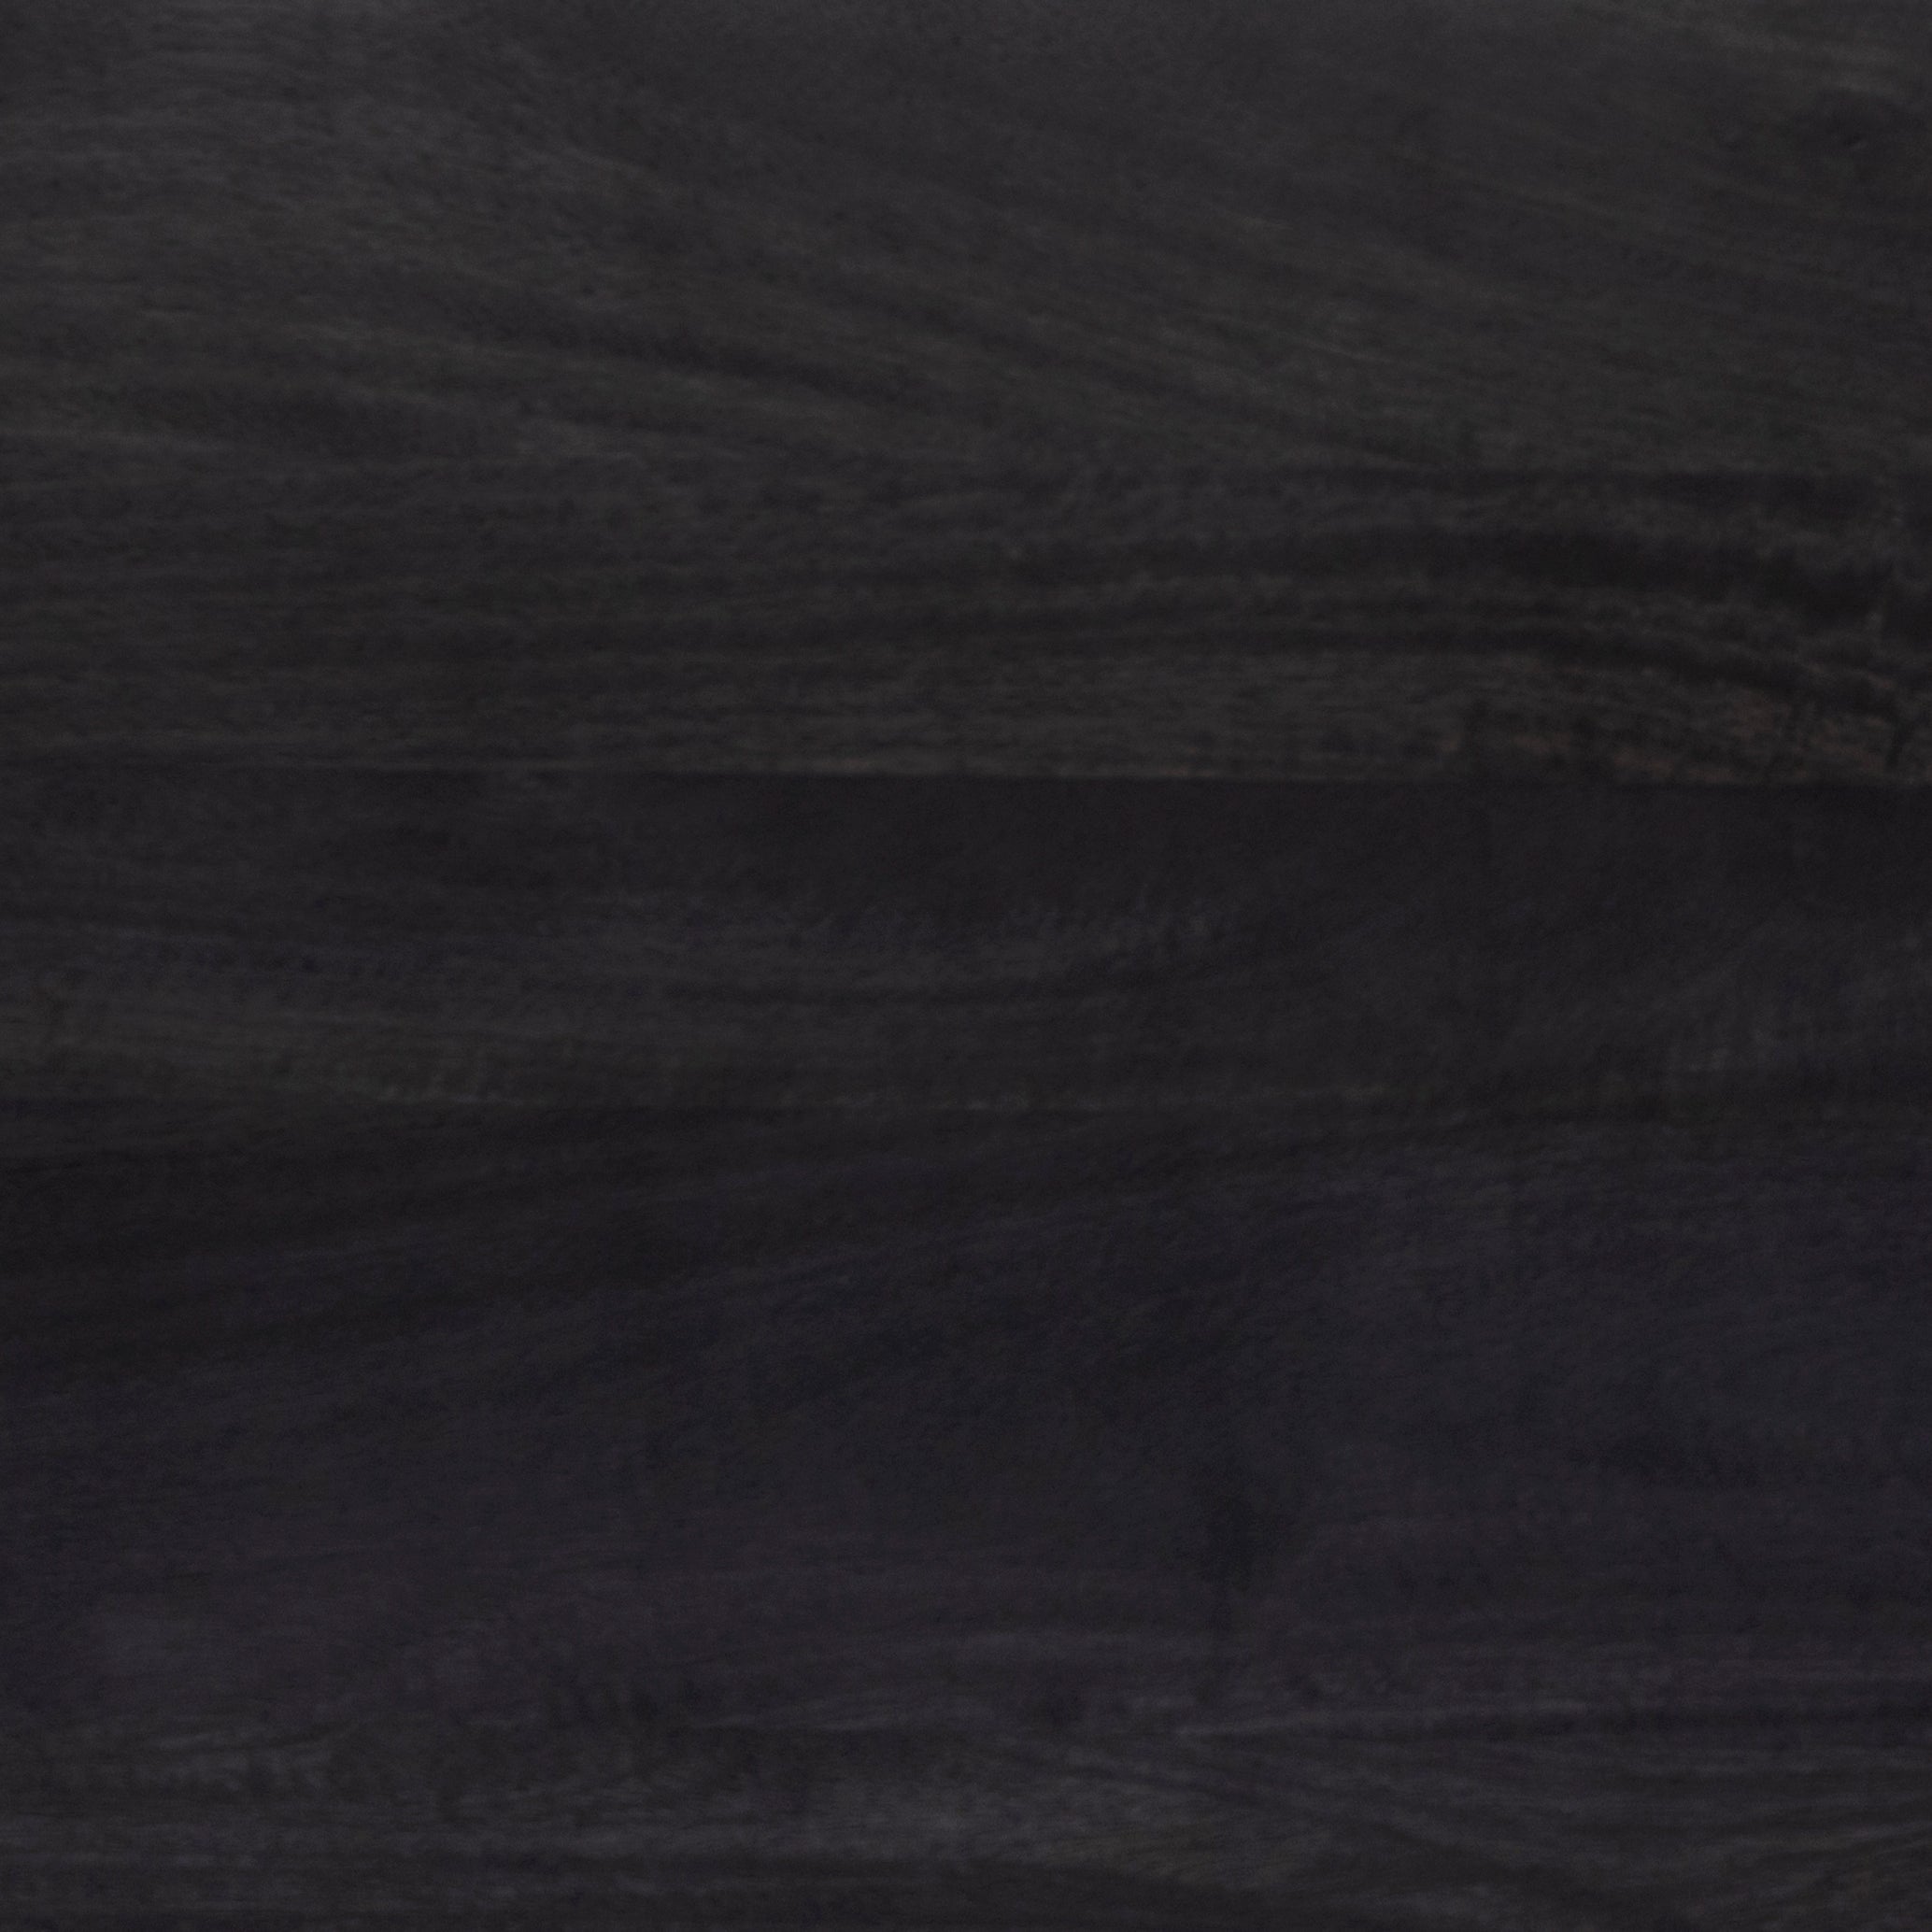 Black-finished mango encases nine spacious drawers of woven black cane, for a textural, monochromatic look. Amethyst Home provides interior design, new construction, custom furniture, and area rugs in the Kansas City metro area.